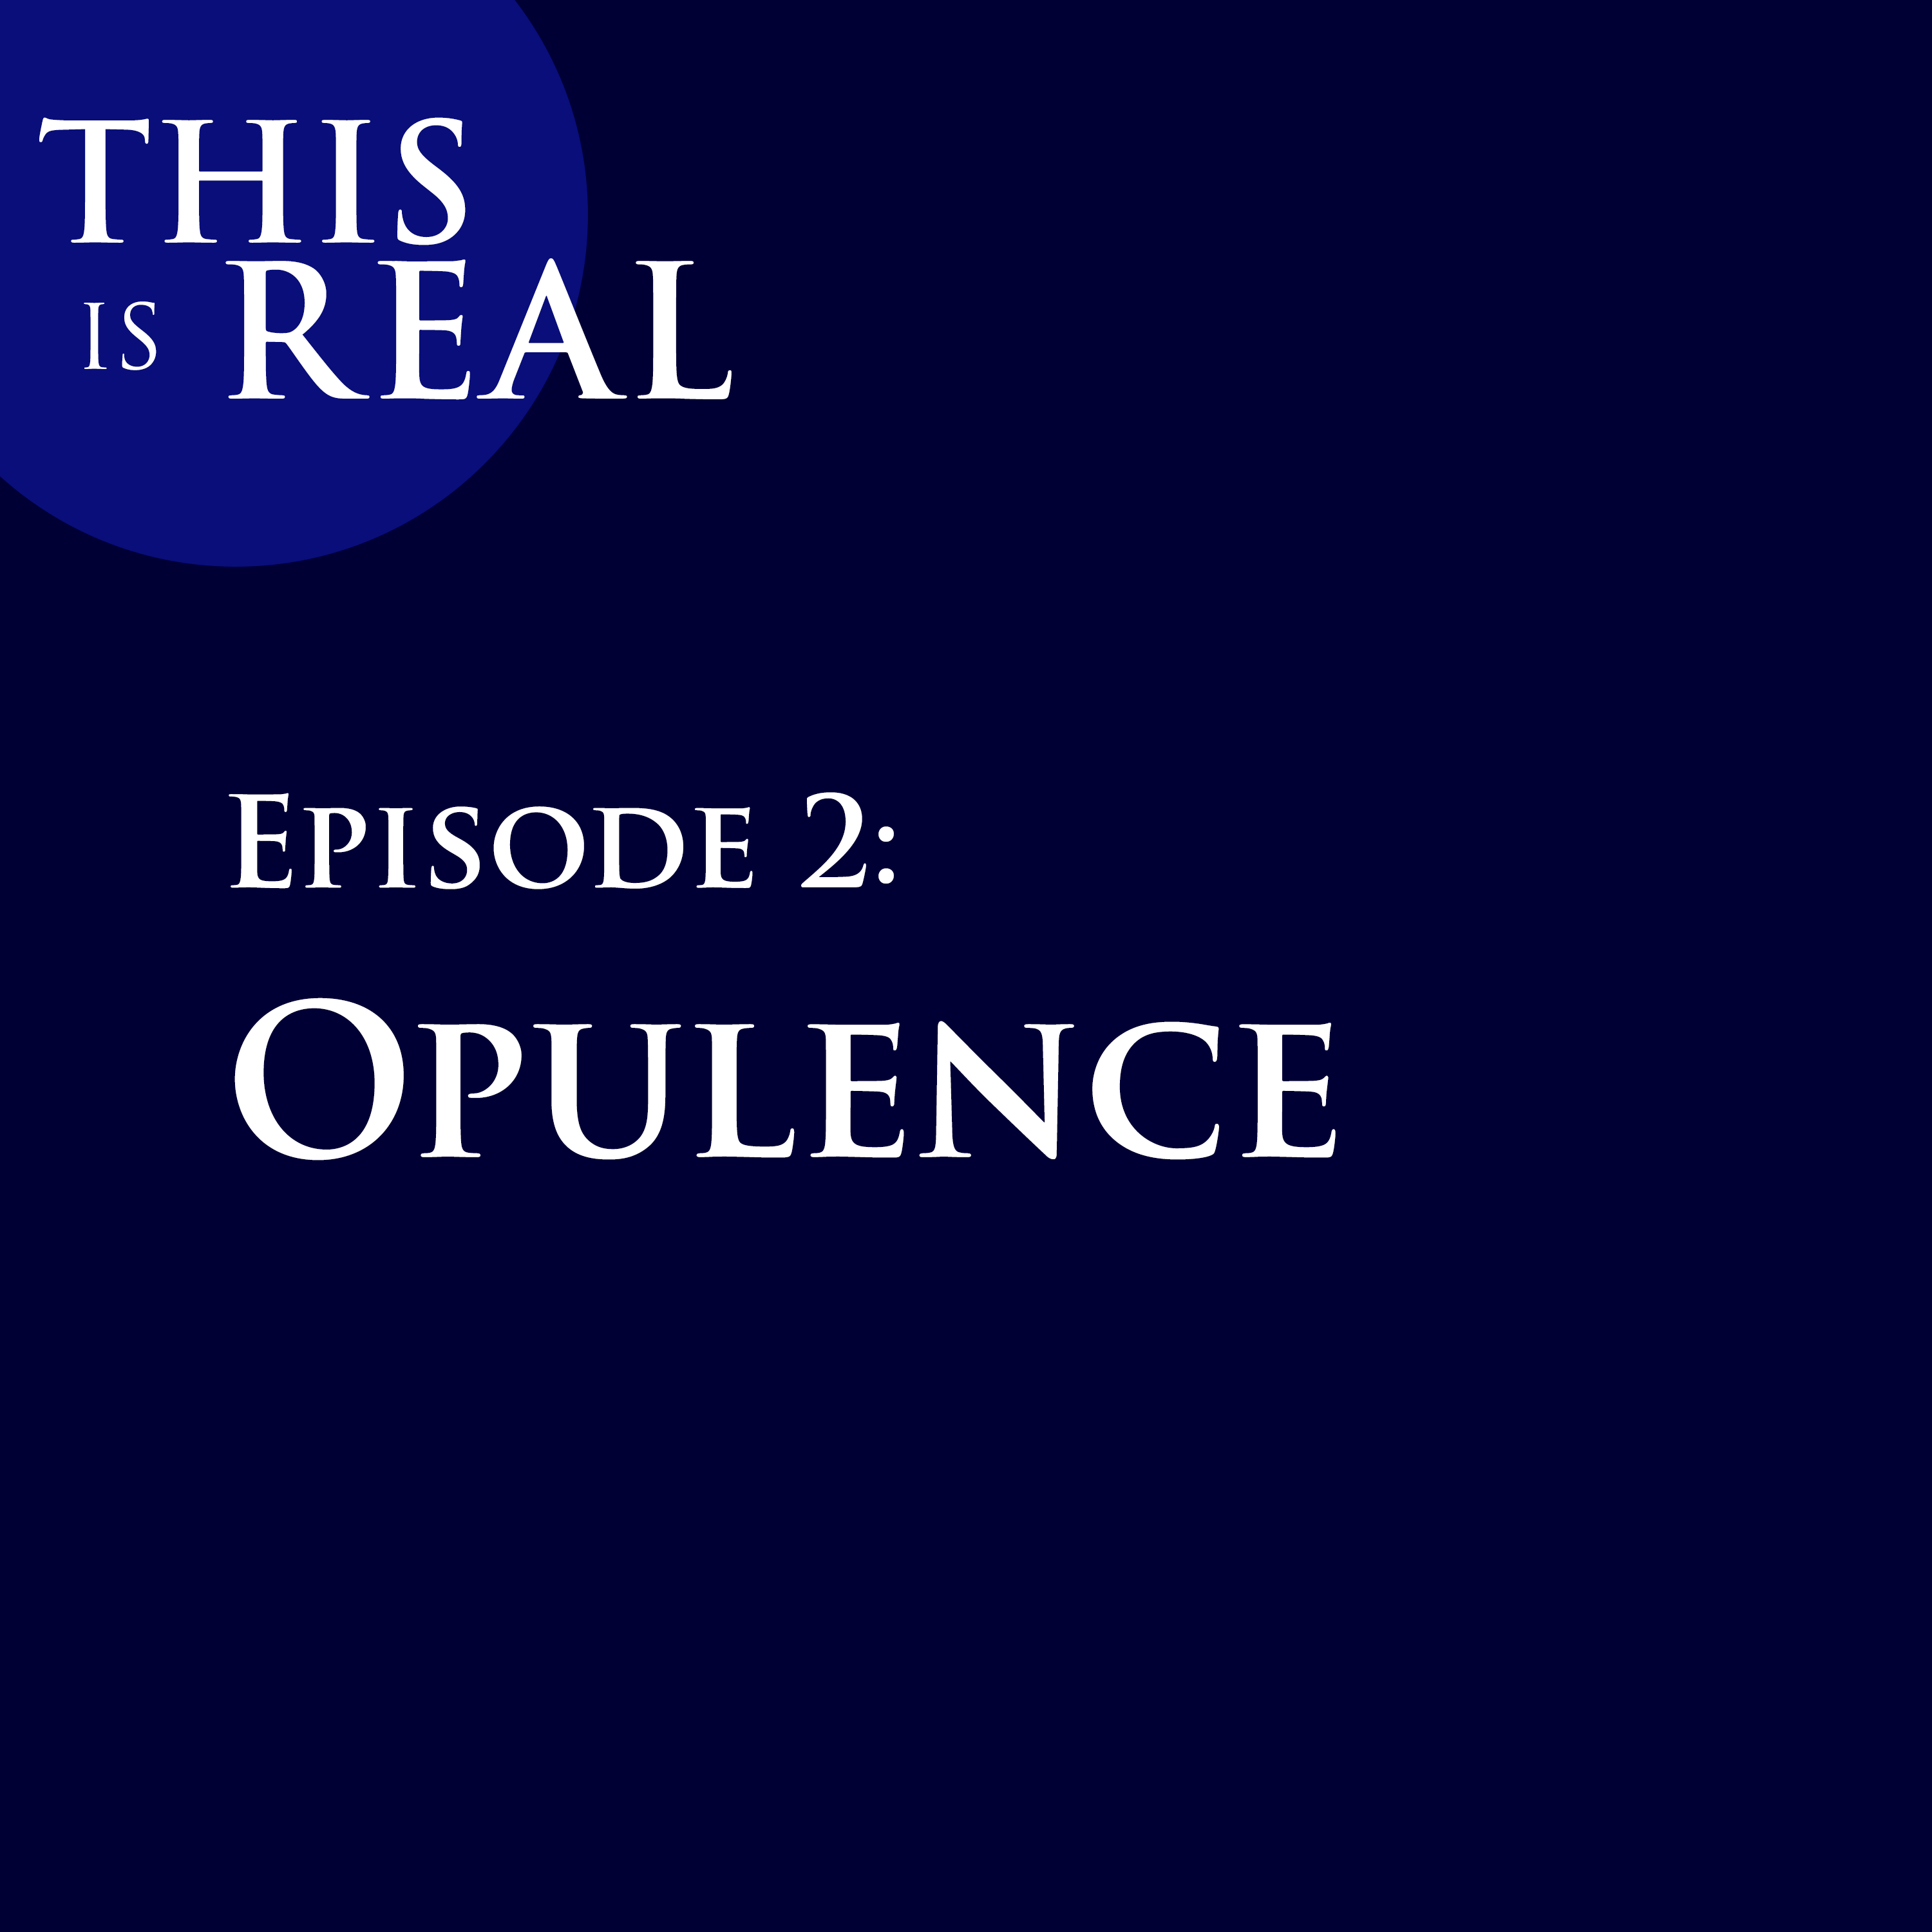 This is Real Episode 2: Opulence